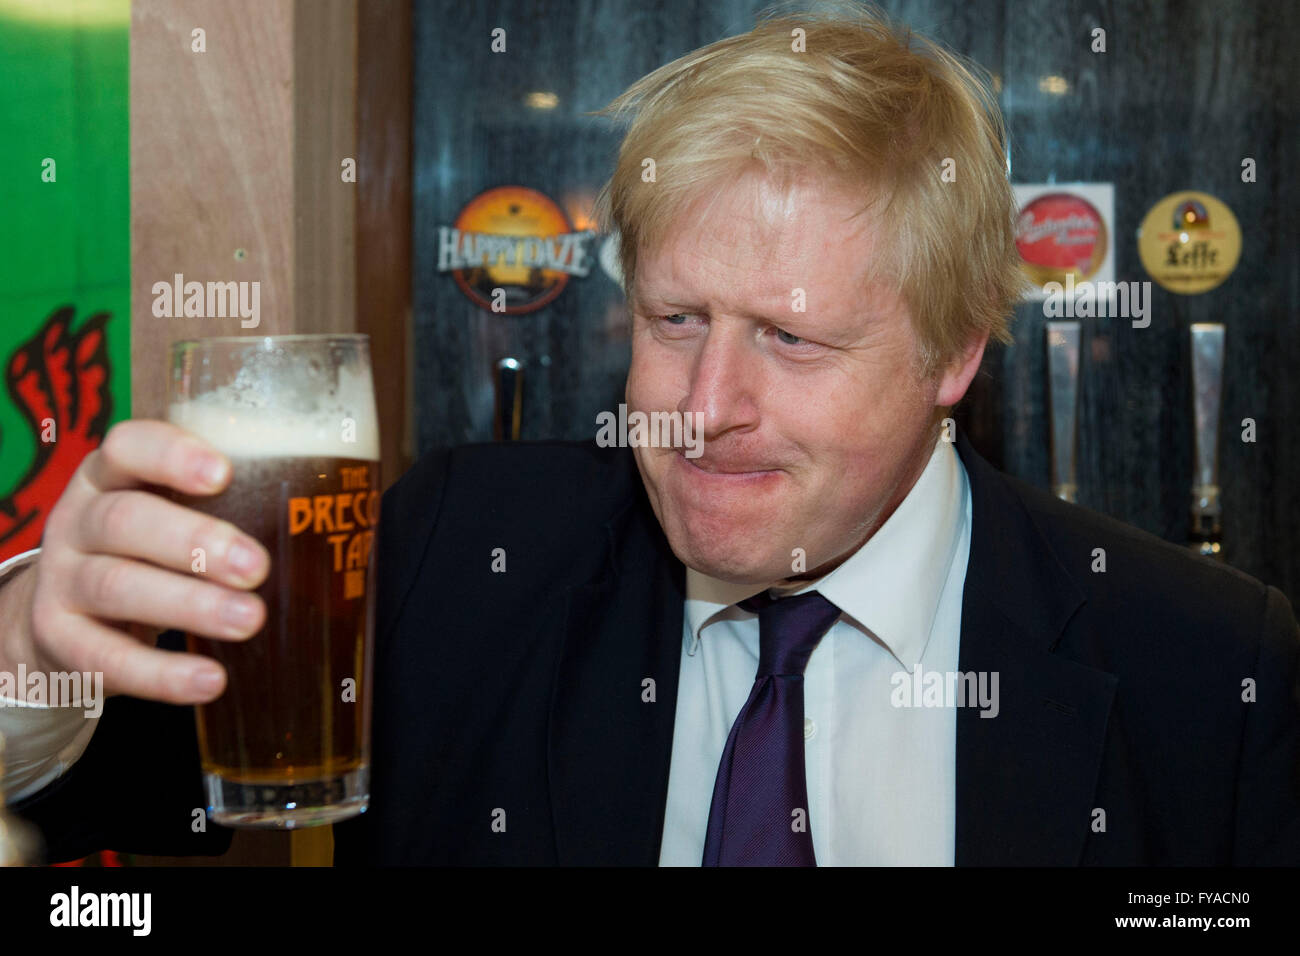 Boris Johnson foreign secretary and MP holding a pint of beer in a pub. Stock Photo